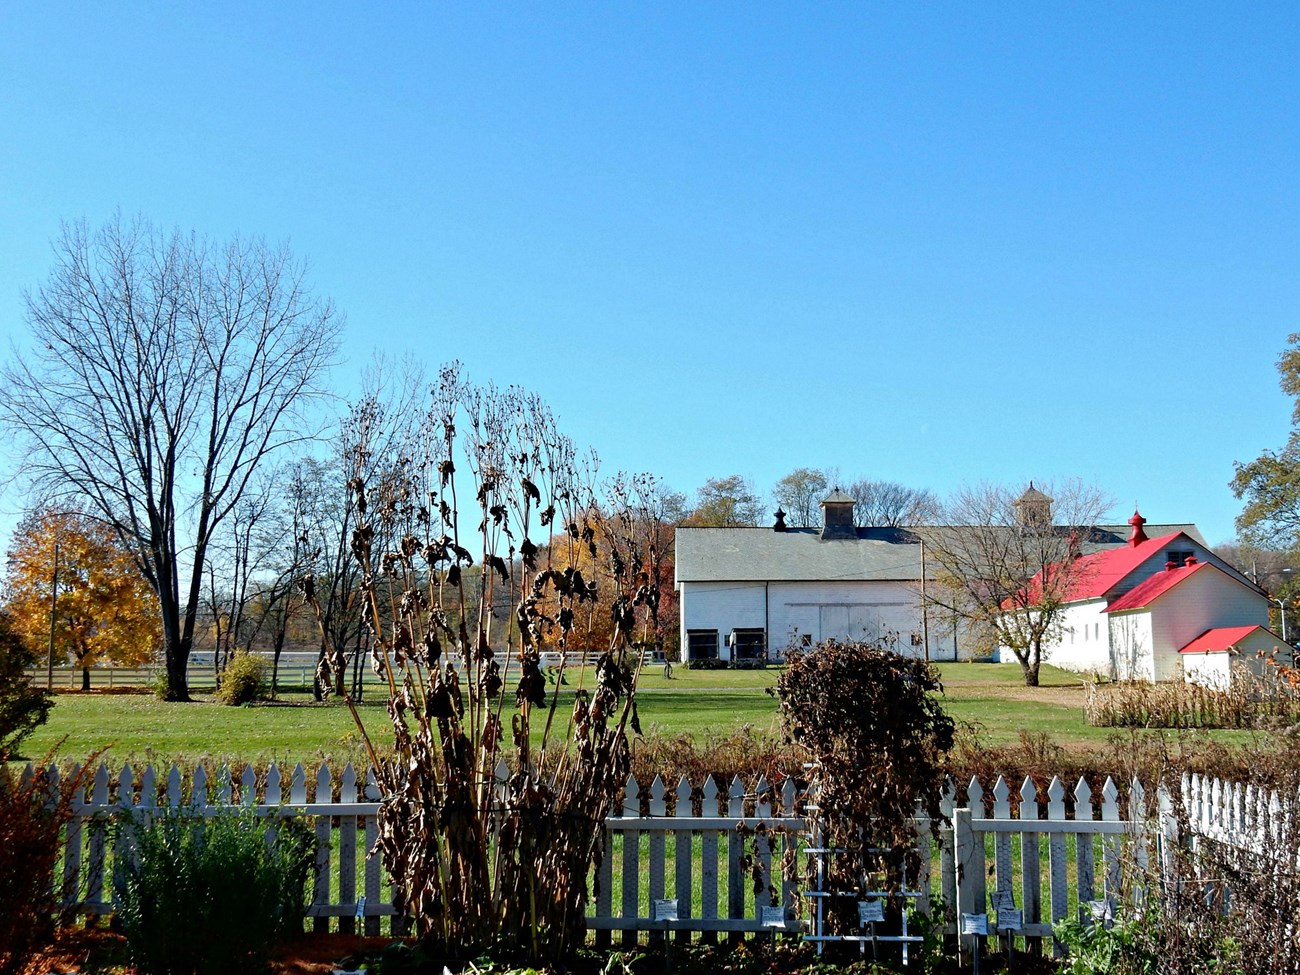 looking from a fenced in herb garden towards a large white barn